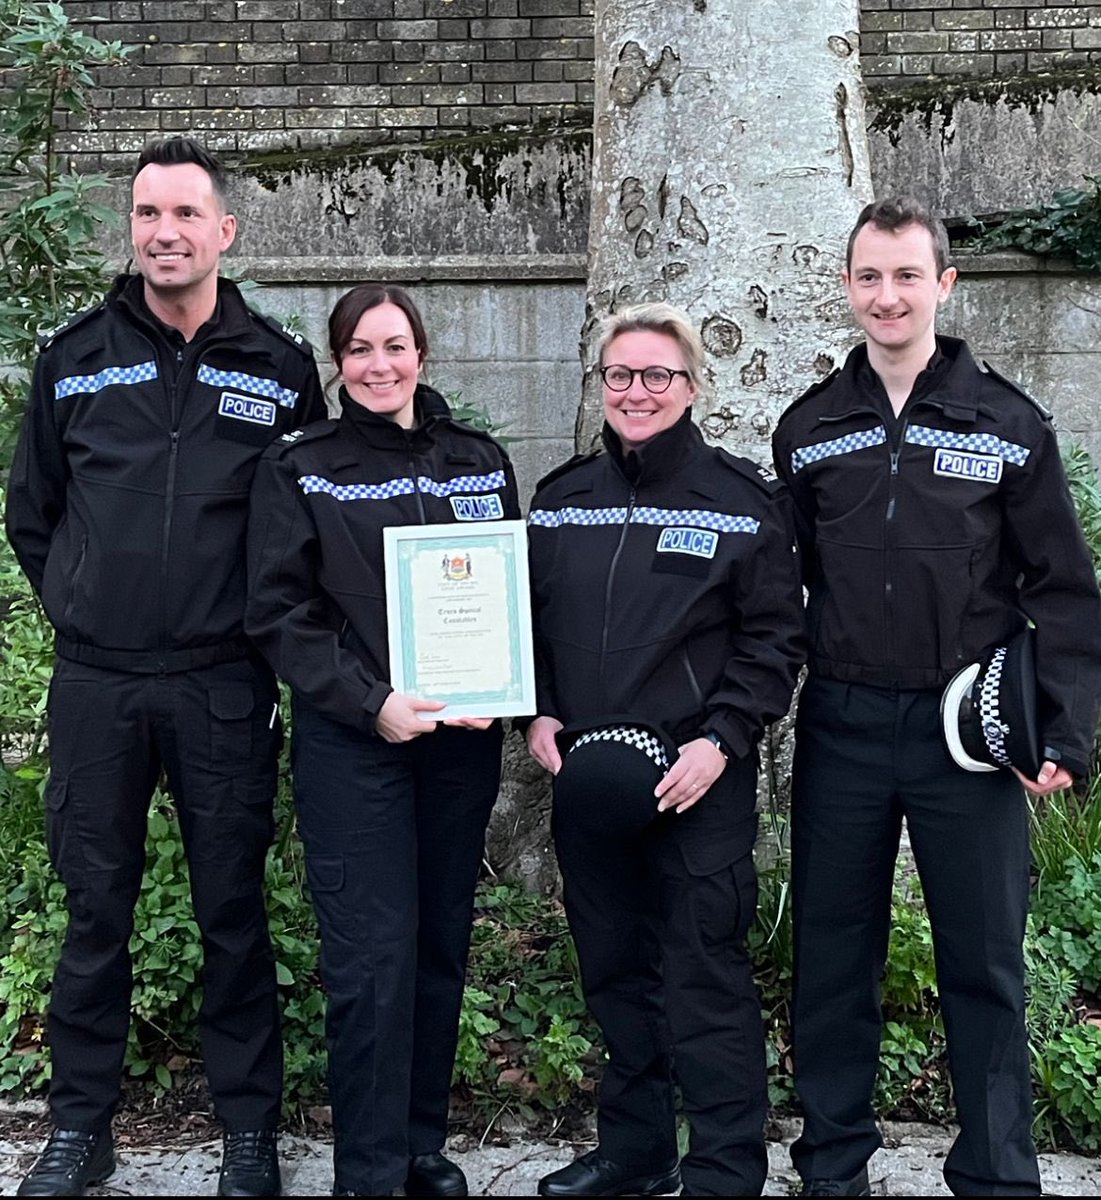 We don’t volunteer for praise & awards but it was great to be recognised by @TruroCivSoc on Friday with a Civic Award for the service our Truro team deliver to the City. Fantastic to see our positive impacts recognised! 🤙🏽🙏🏼 @DC_Police @Supt_Thomo @ChSuptBenDeer @DCCJimColwell